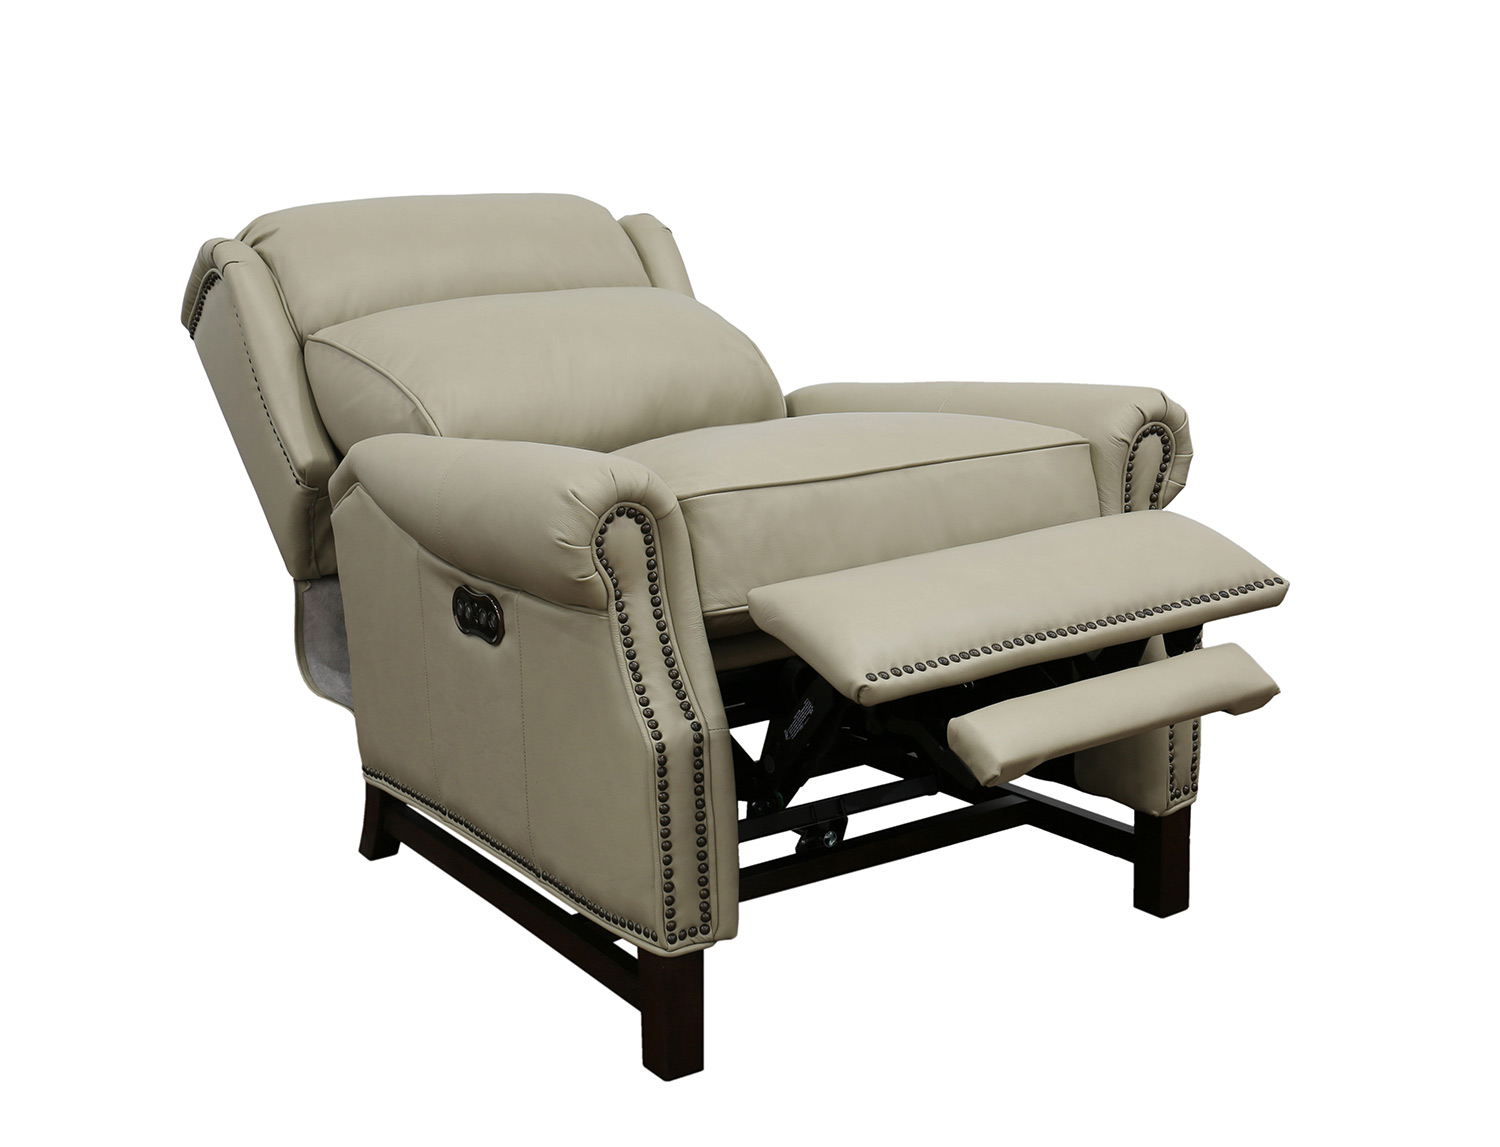 Barcalounger Thornfield Power Recliner Chair with Power Head Rest - Shoreham Cream/All Leather